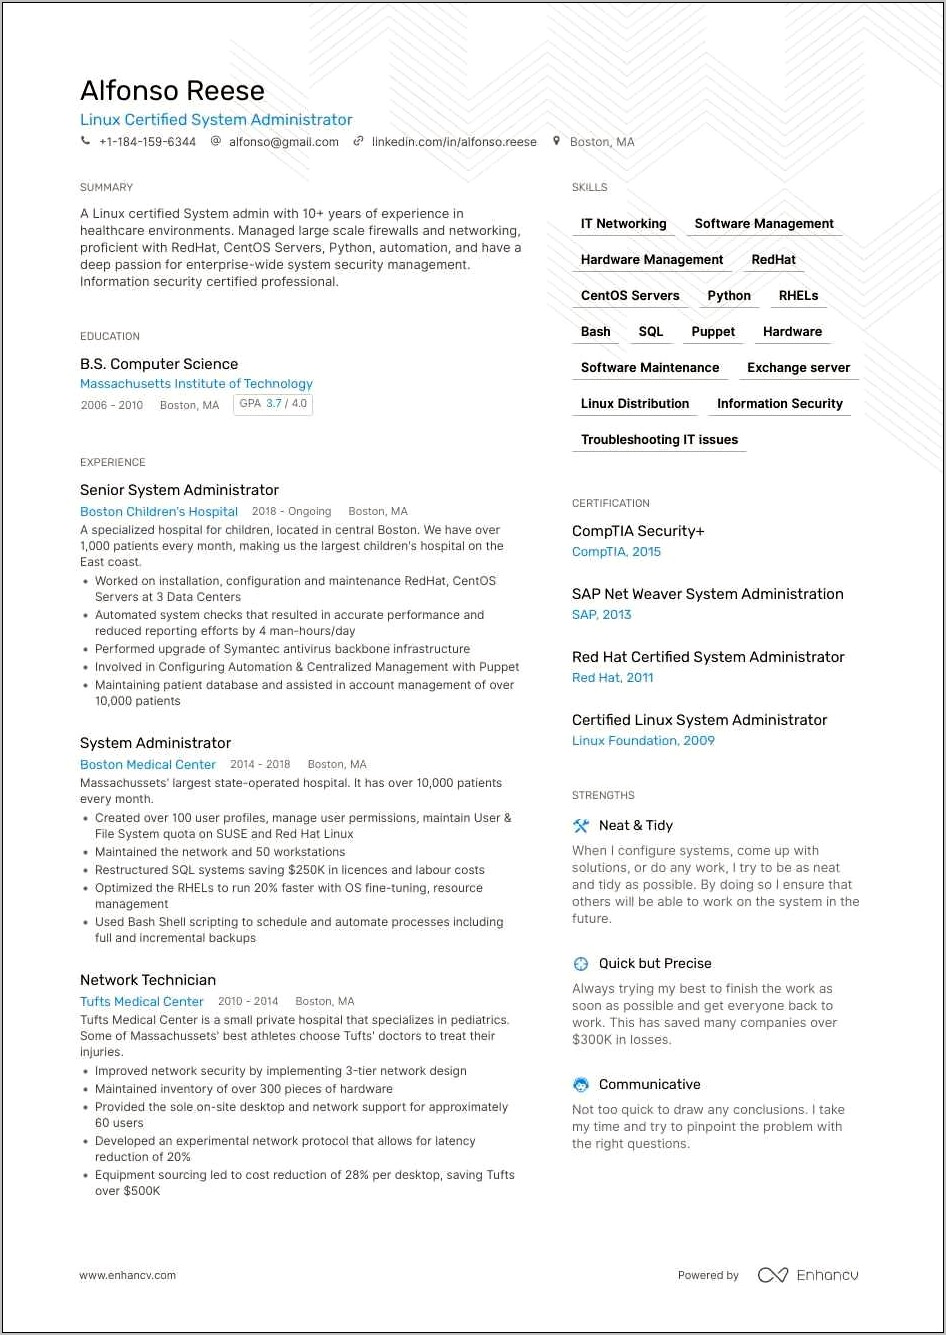 Resume Examples For As 400 Administrator